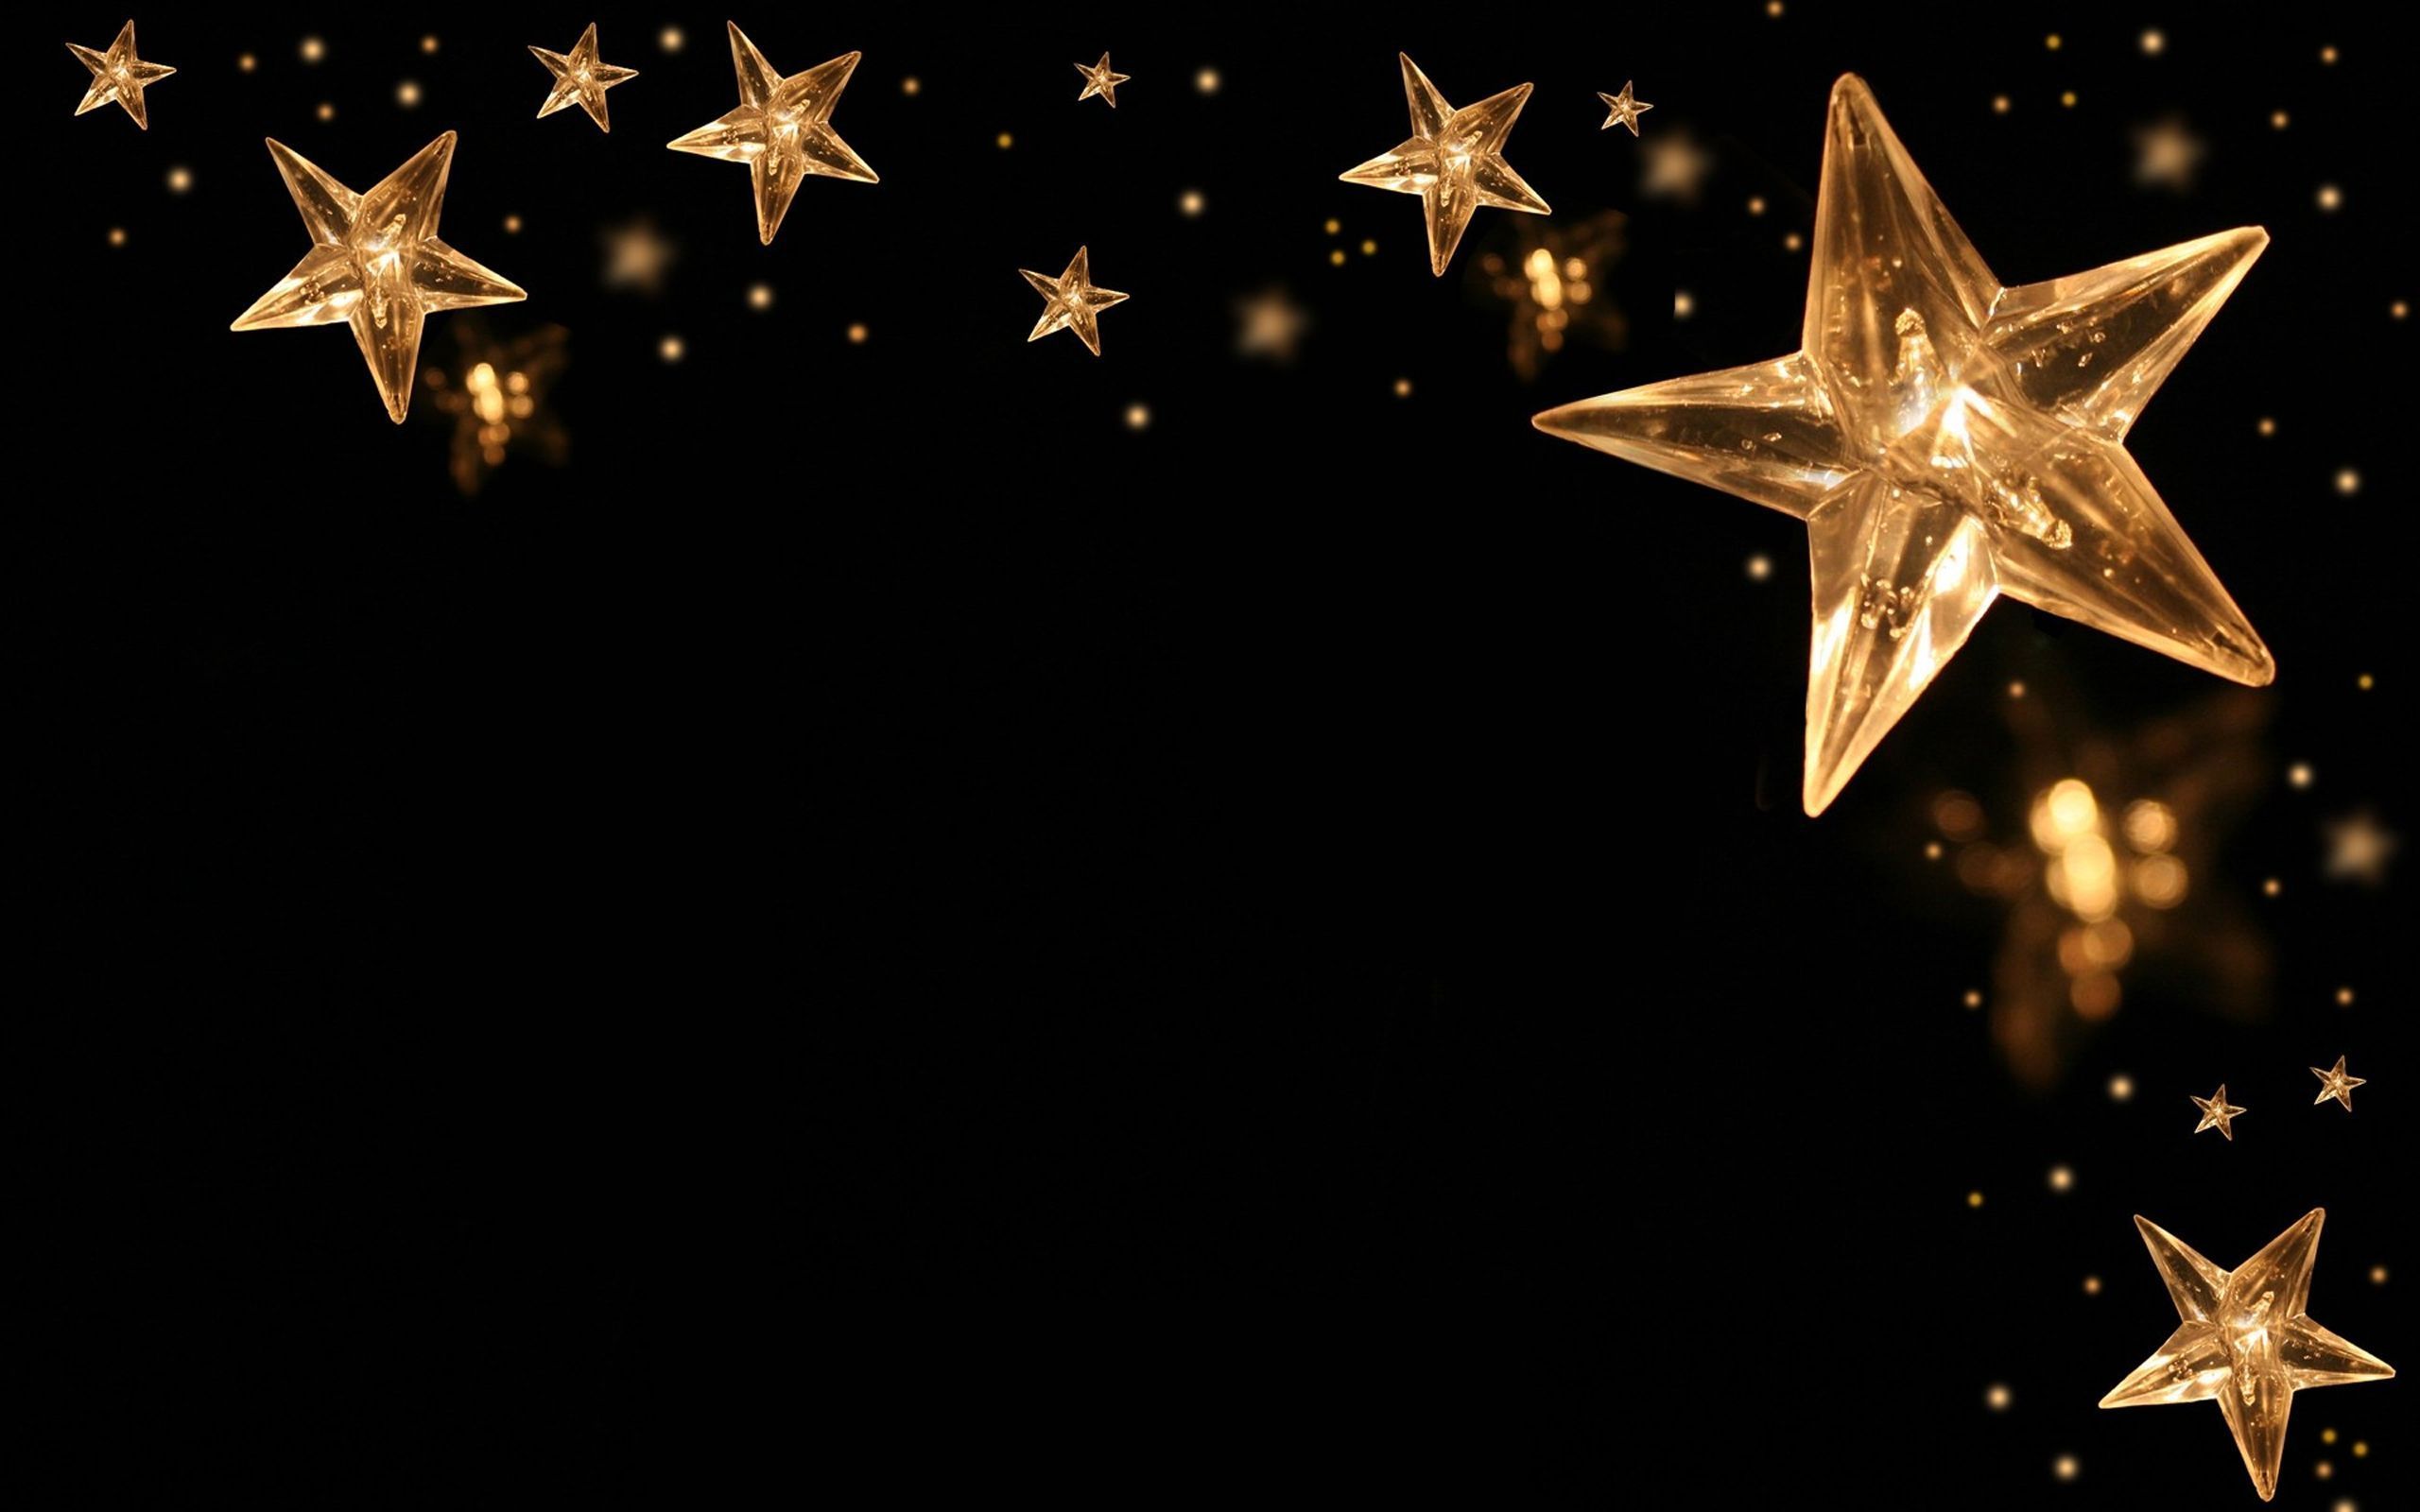 Golden Stars Wallpaper Abstract Image Background Picture